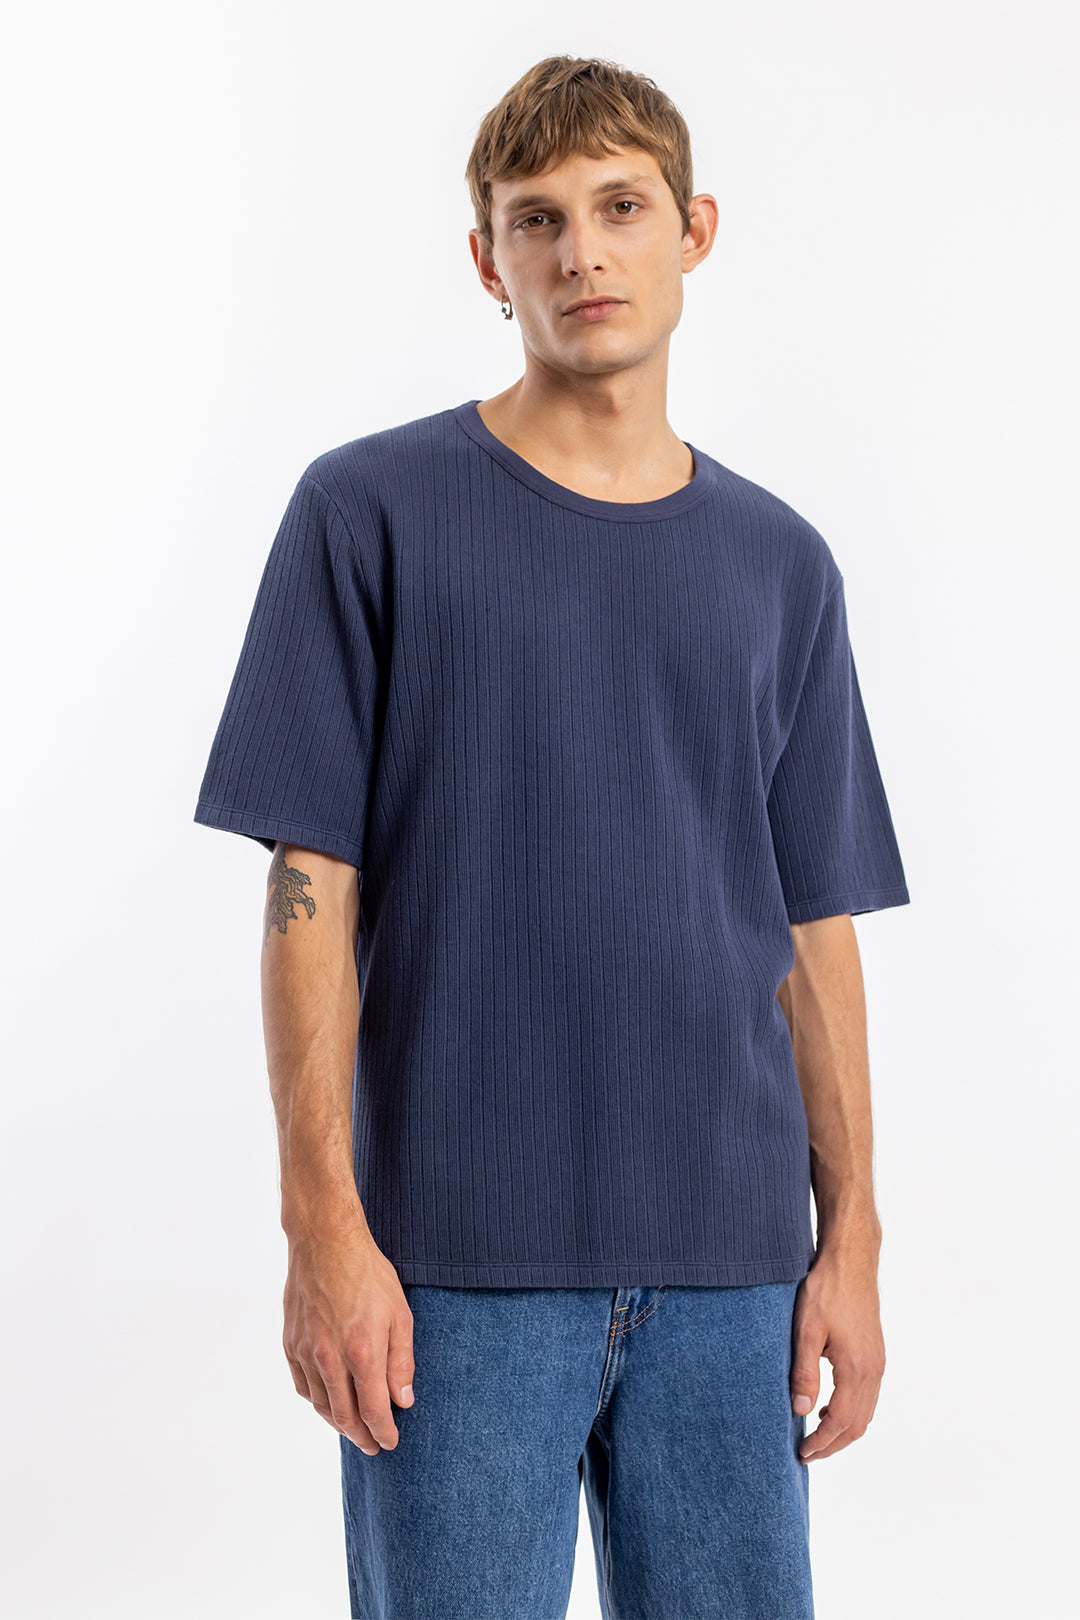 Dark blue, ribbed T-shirt made from 100% organic cotton from Rotholz